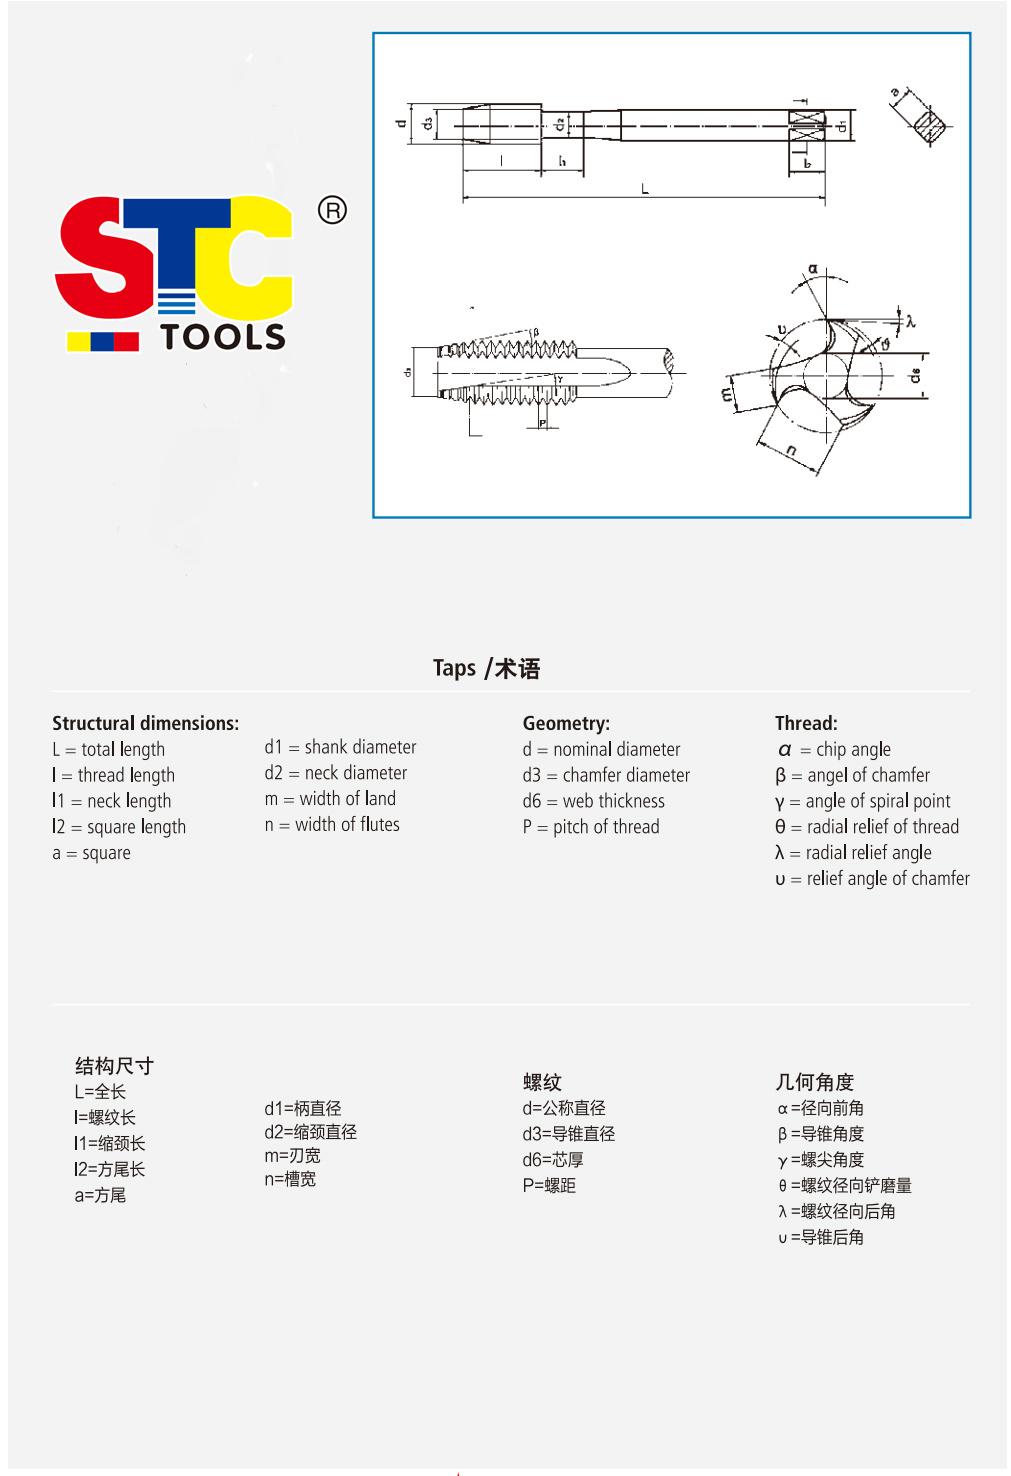 HSS Pm Forming Taps for Motorcycle Spare Parts